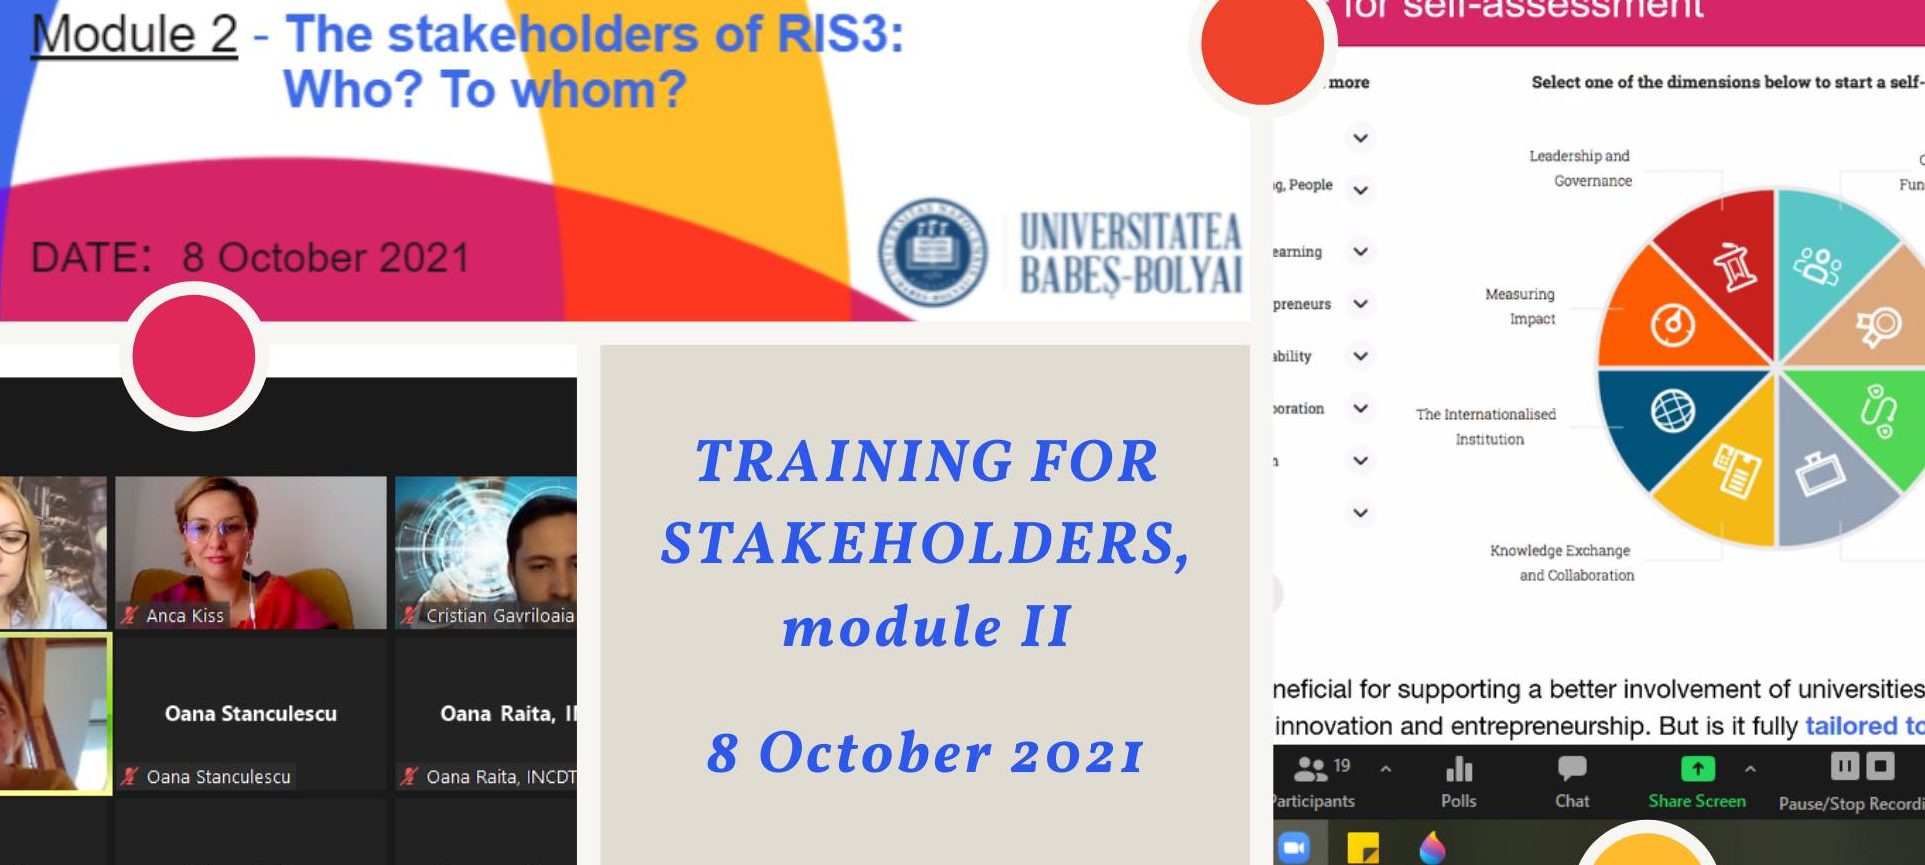 UBB – module II of the Training for Stakeholders